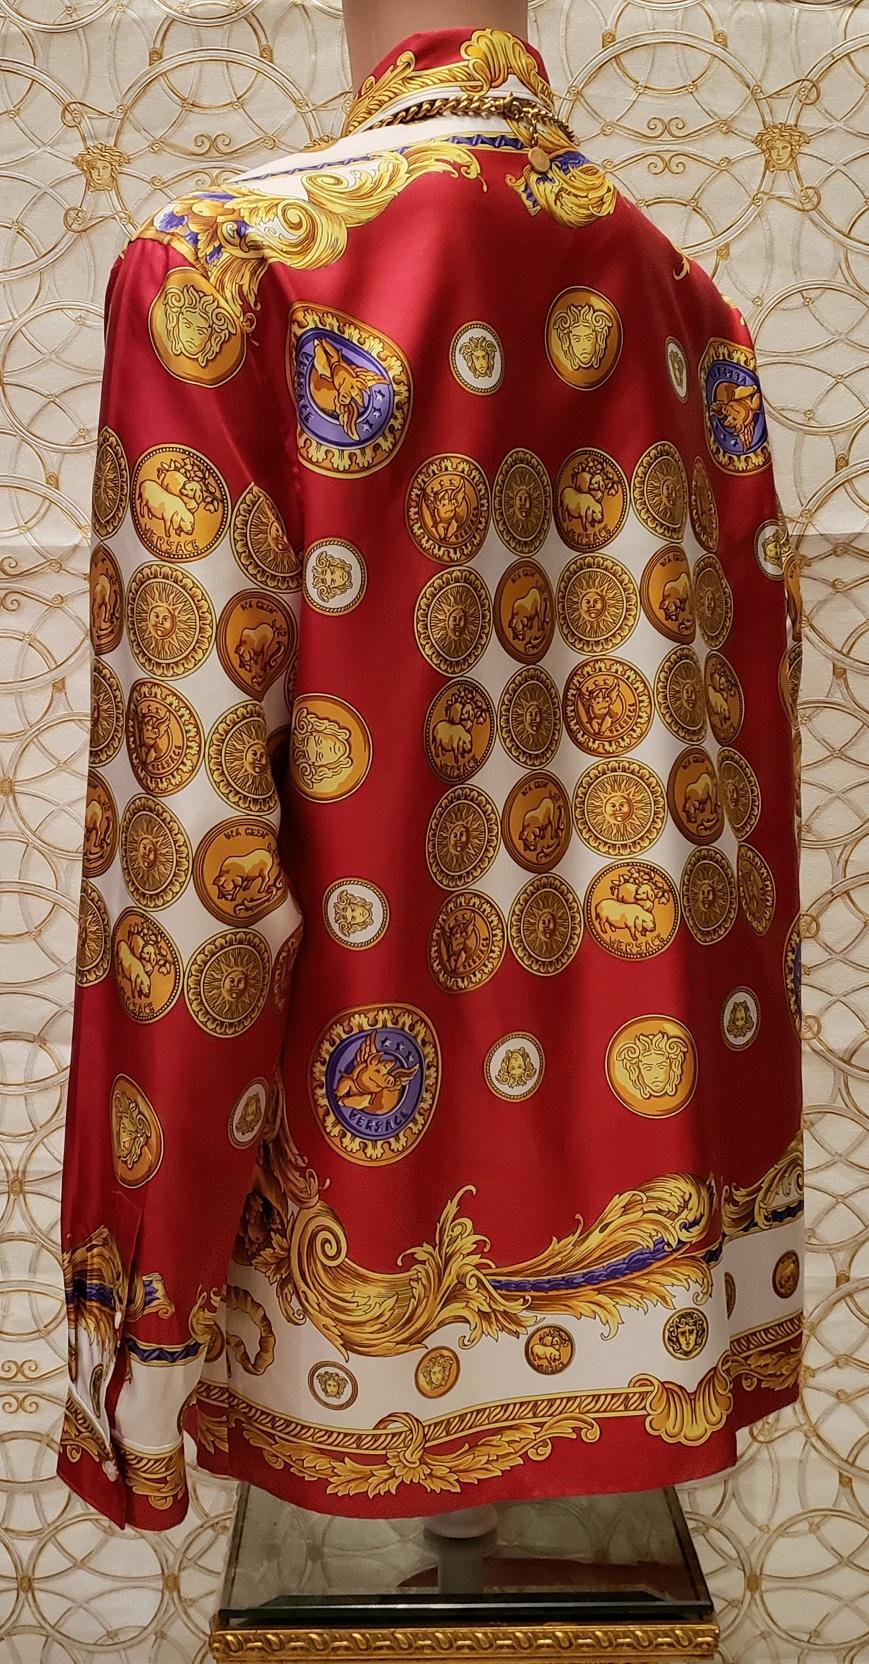 NEW VERSACE LUNAR NEW YEAR LIMITED EDITION SILK SHIRT Size 50 - L 6